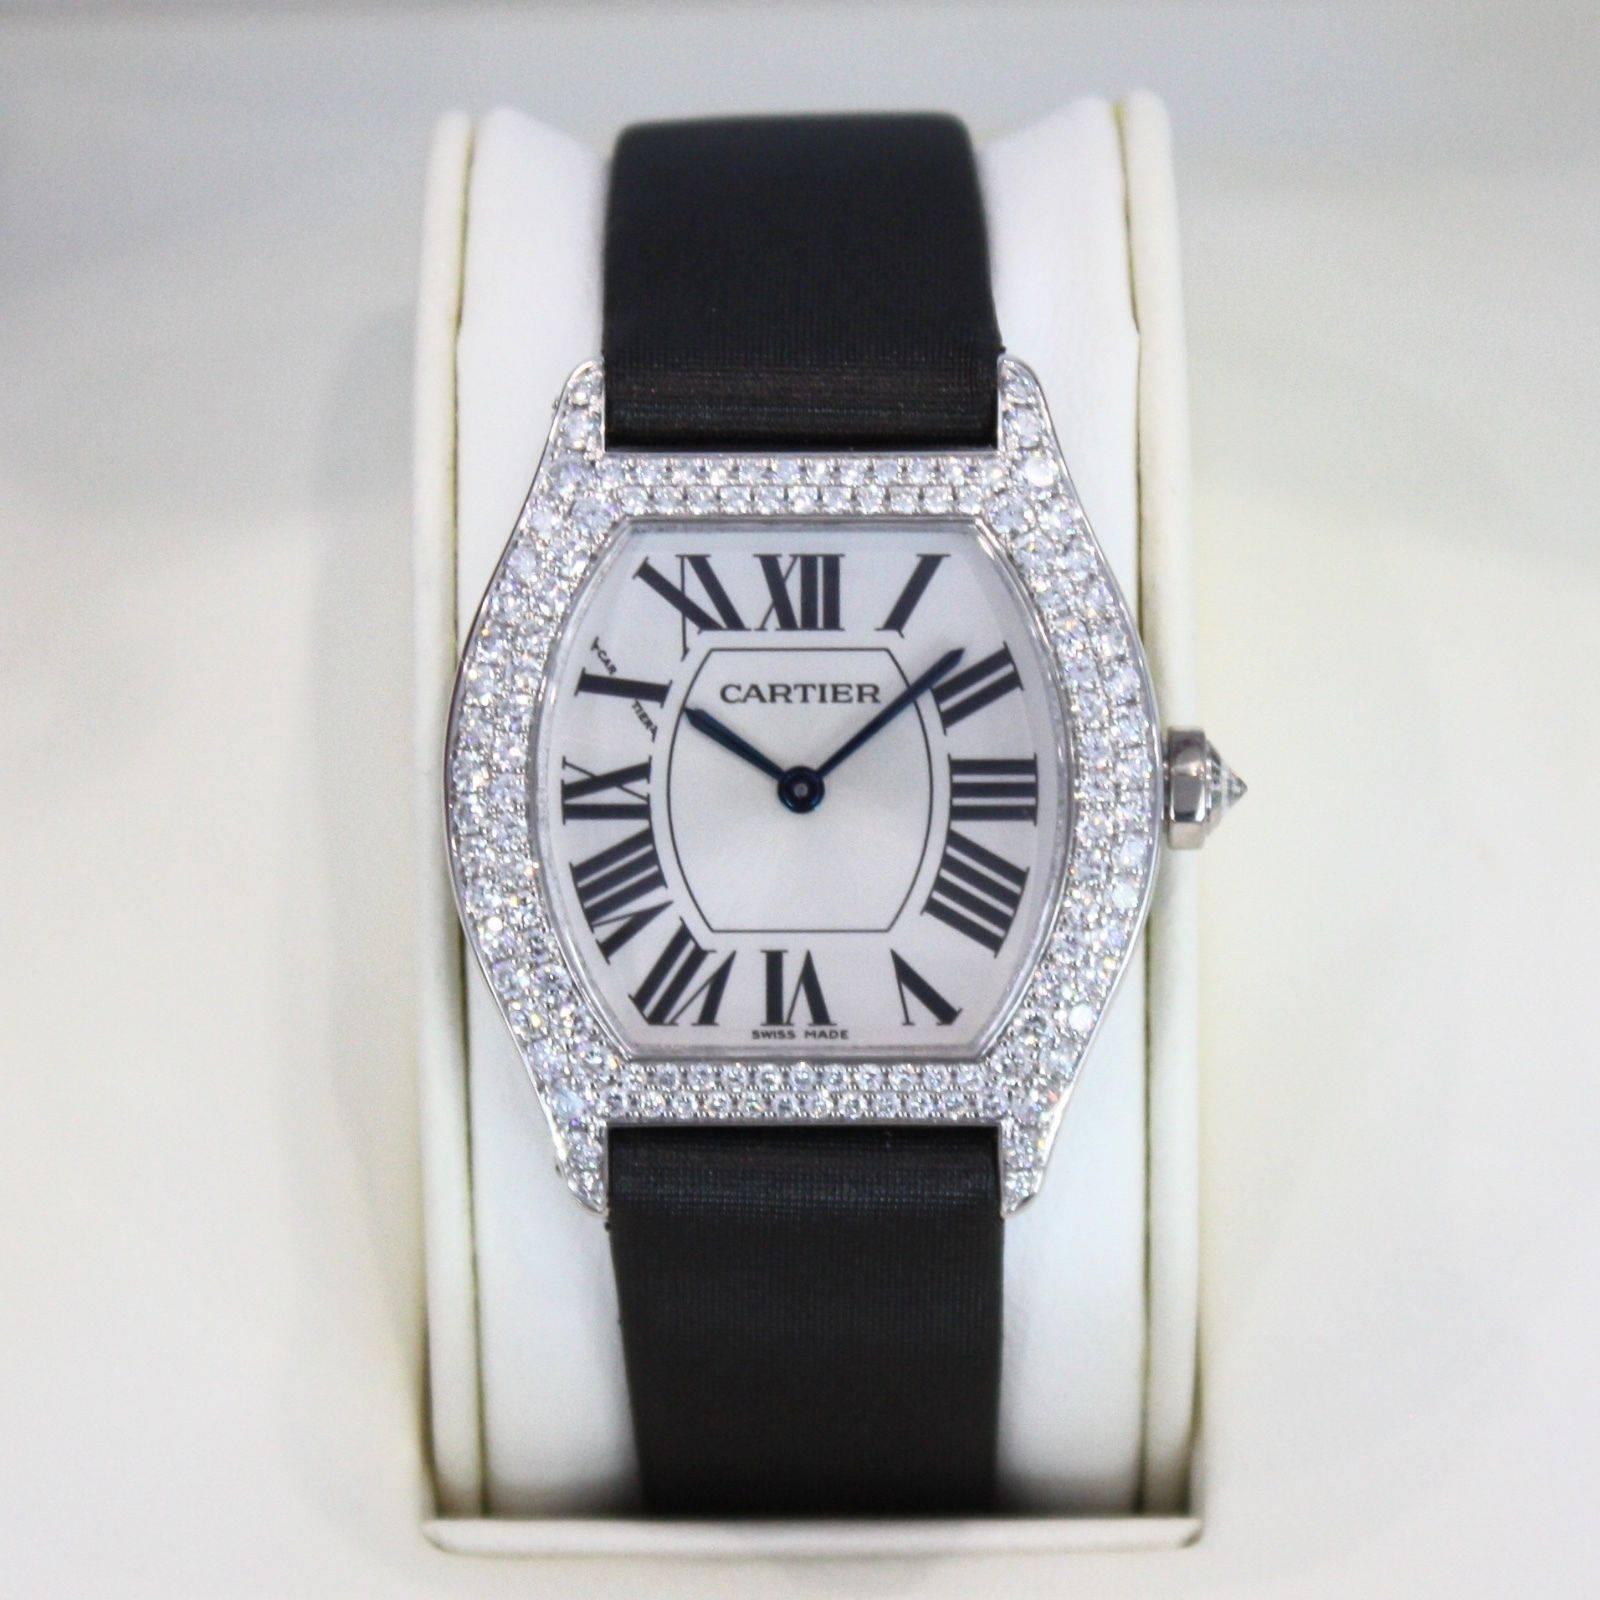 Brand Name: Cartier
Style Number: 2644
Series: Tortue Collection de Privee
Gender: Lady's
Case Material: 18k White Gold w/ Diamonds
Dial Color	: Silver Guilloche w/ Roman 
Movement: Mechanical Wind
Engine: Cal. 430
Functions: Hours, Minutes
Crystal